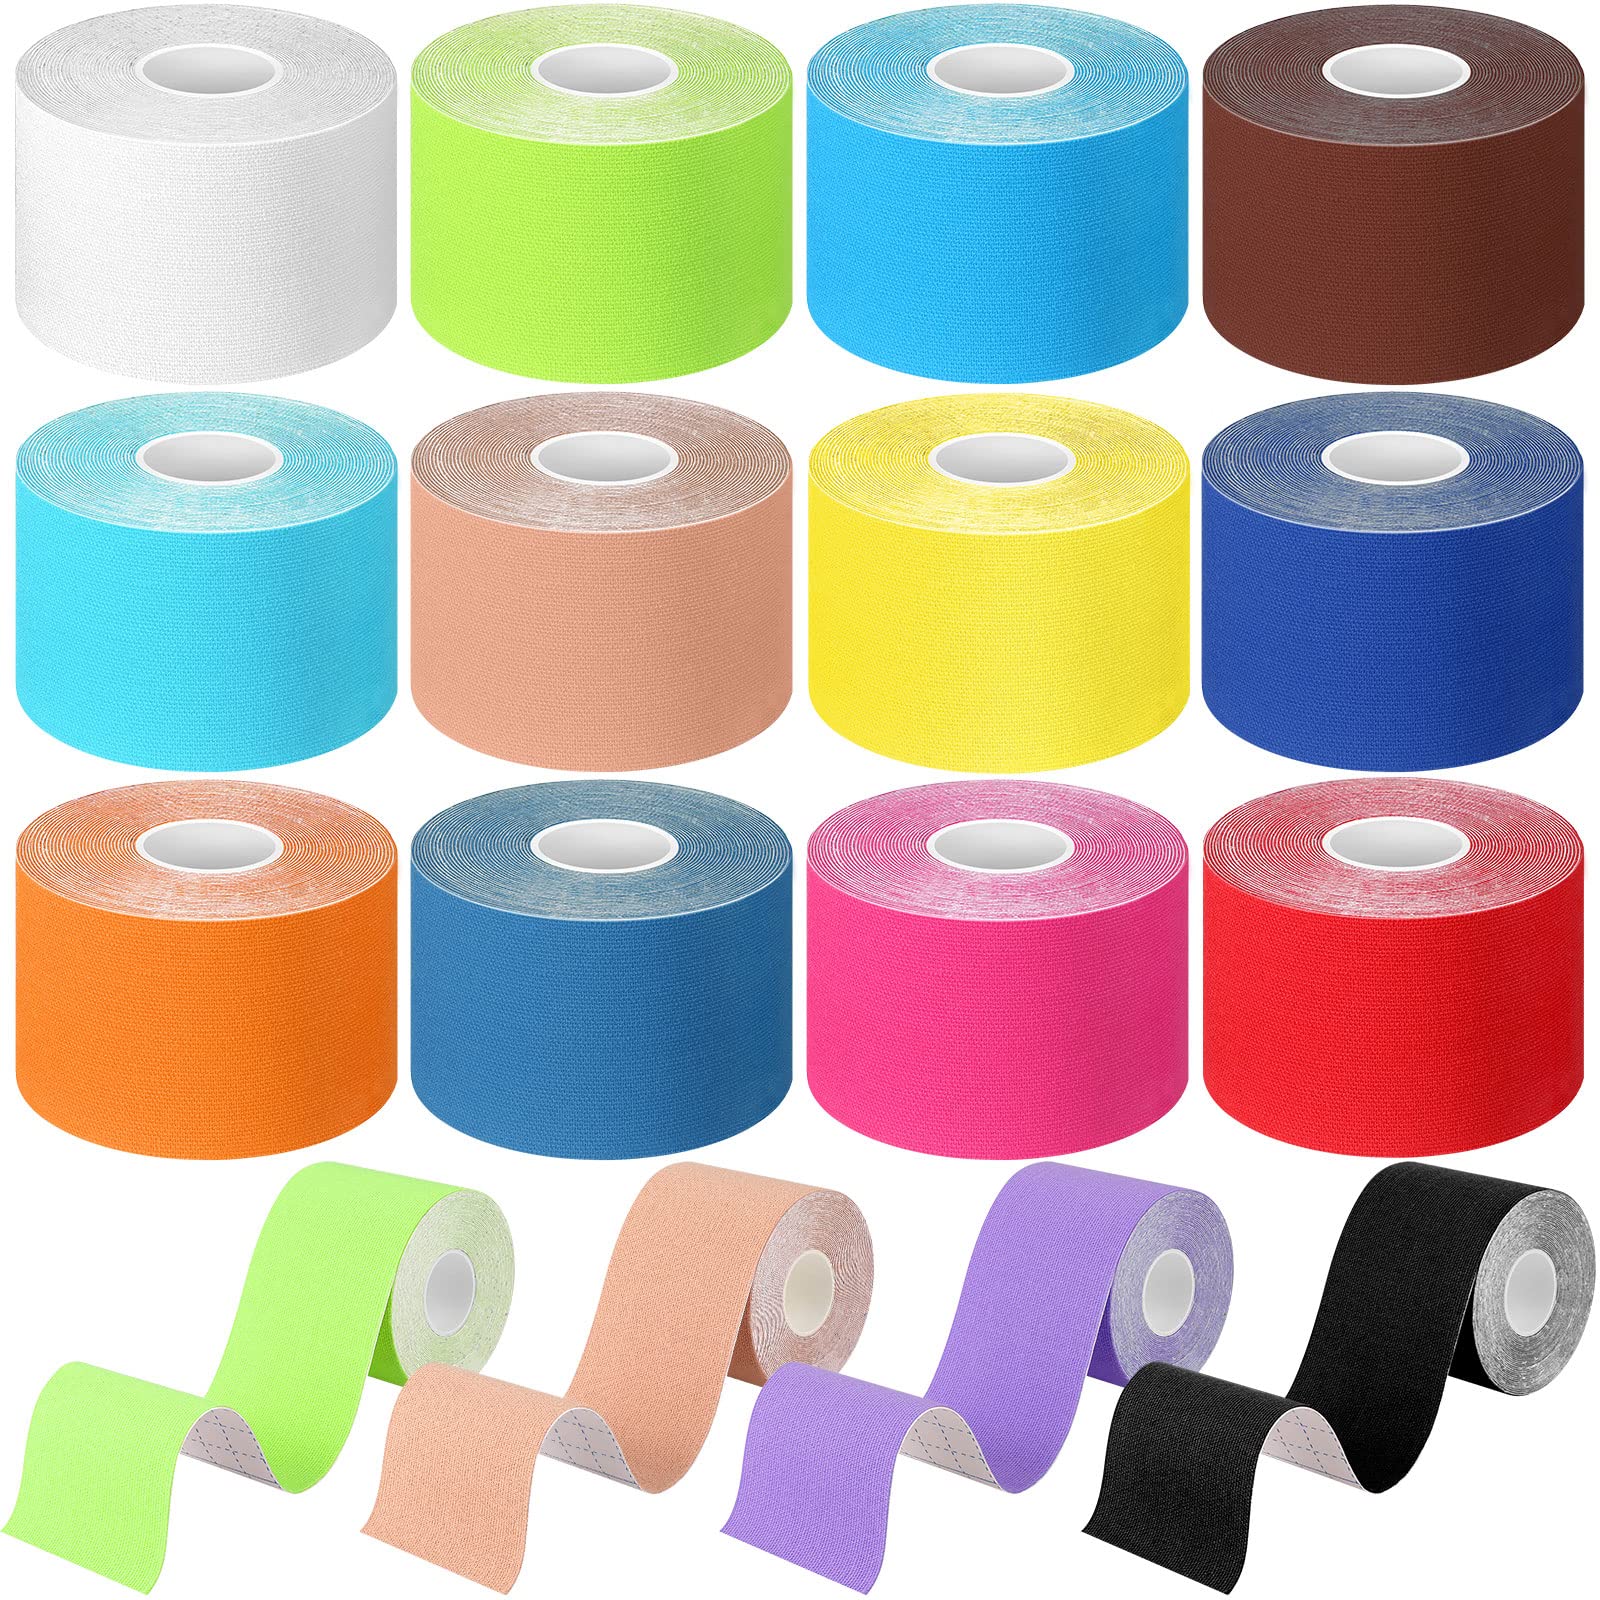 BBTO 15 Rolls Waterproof Breathable Kinesiology Tape 2Inchx16 ft Athletic  Runners Tape Pain Relief Muscle Tape